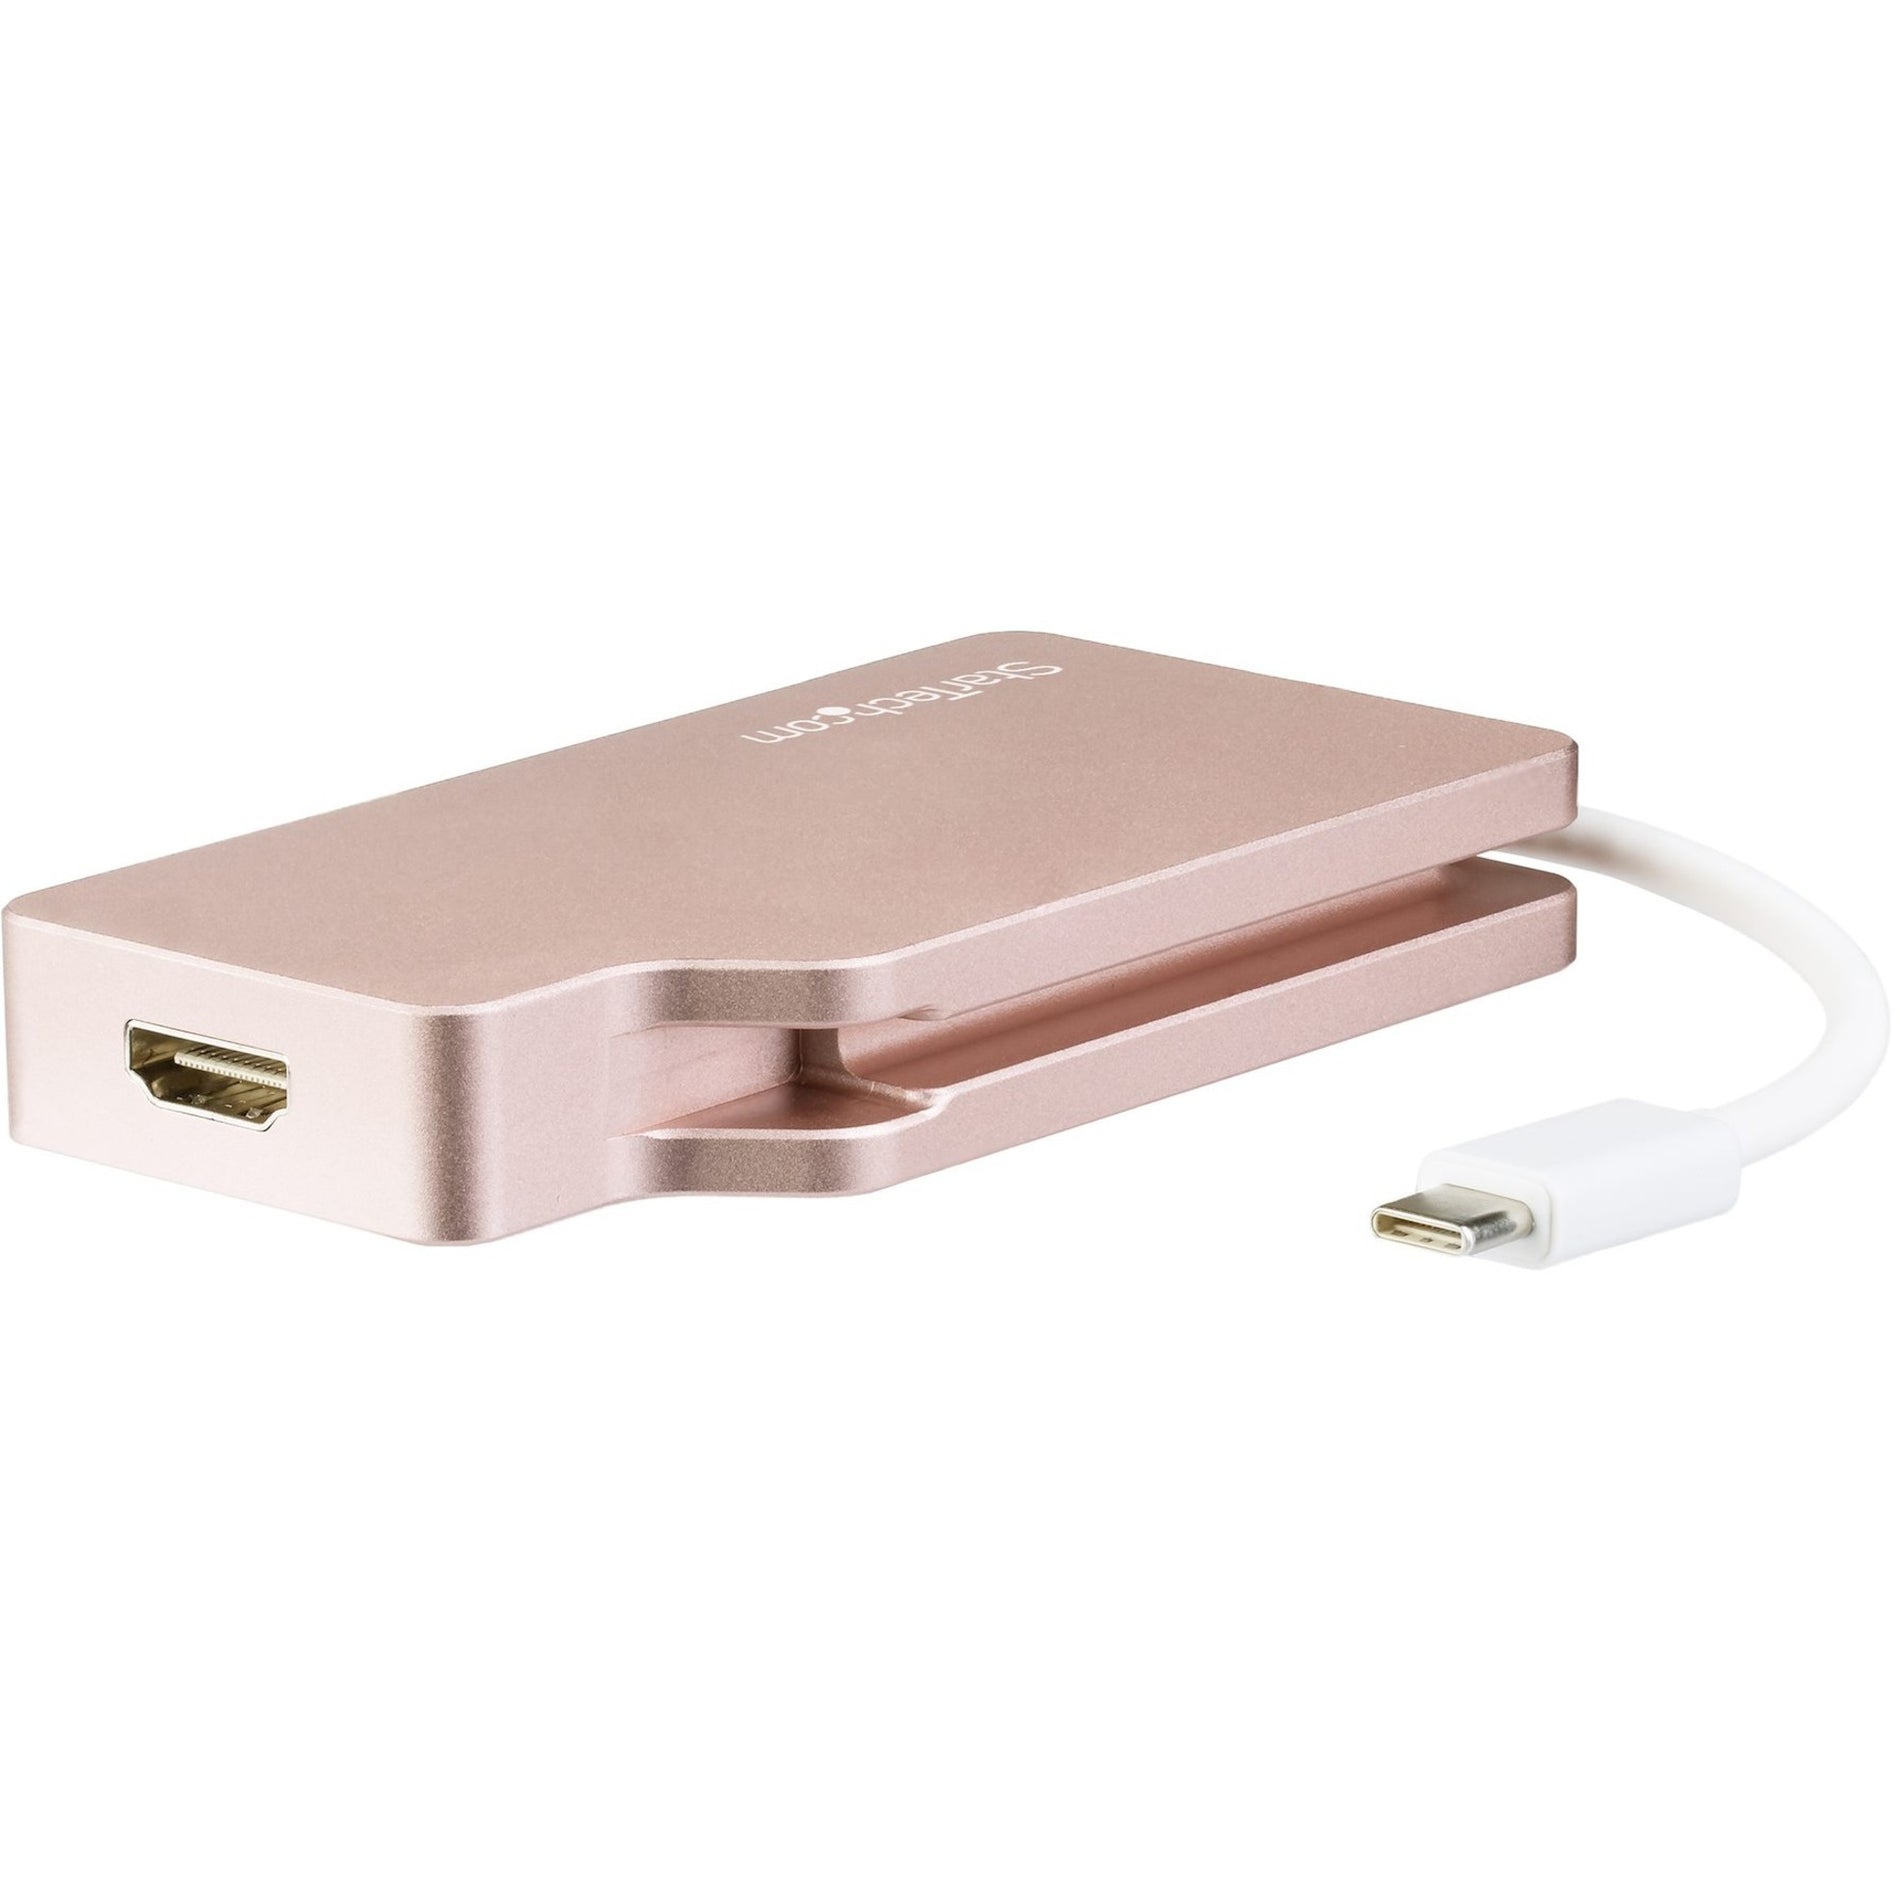 StarTech.com CDPVDHDMDPRG USB-C Multiport Video Adapter - 4-in-1 USB-C to VGA, DVI, HDMI or mDP - 4K, Rose Gold [Discontinued]